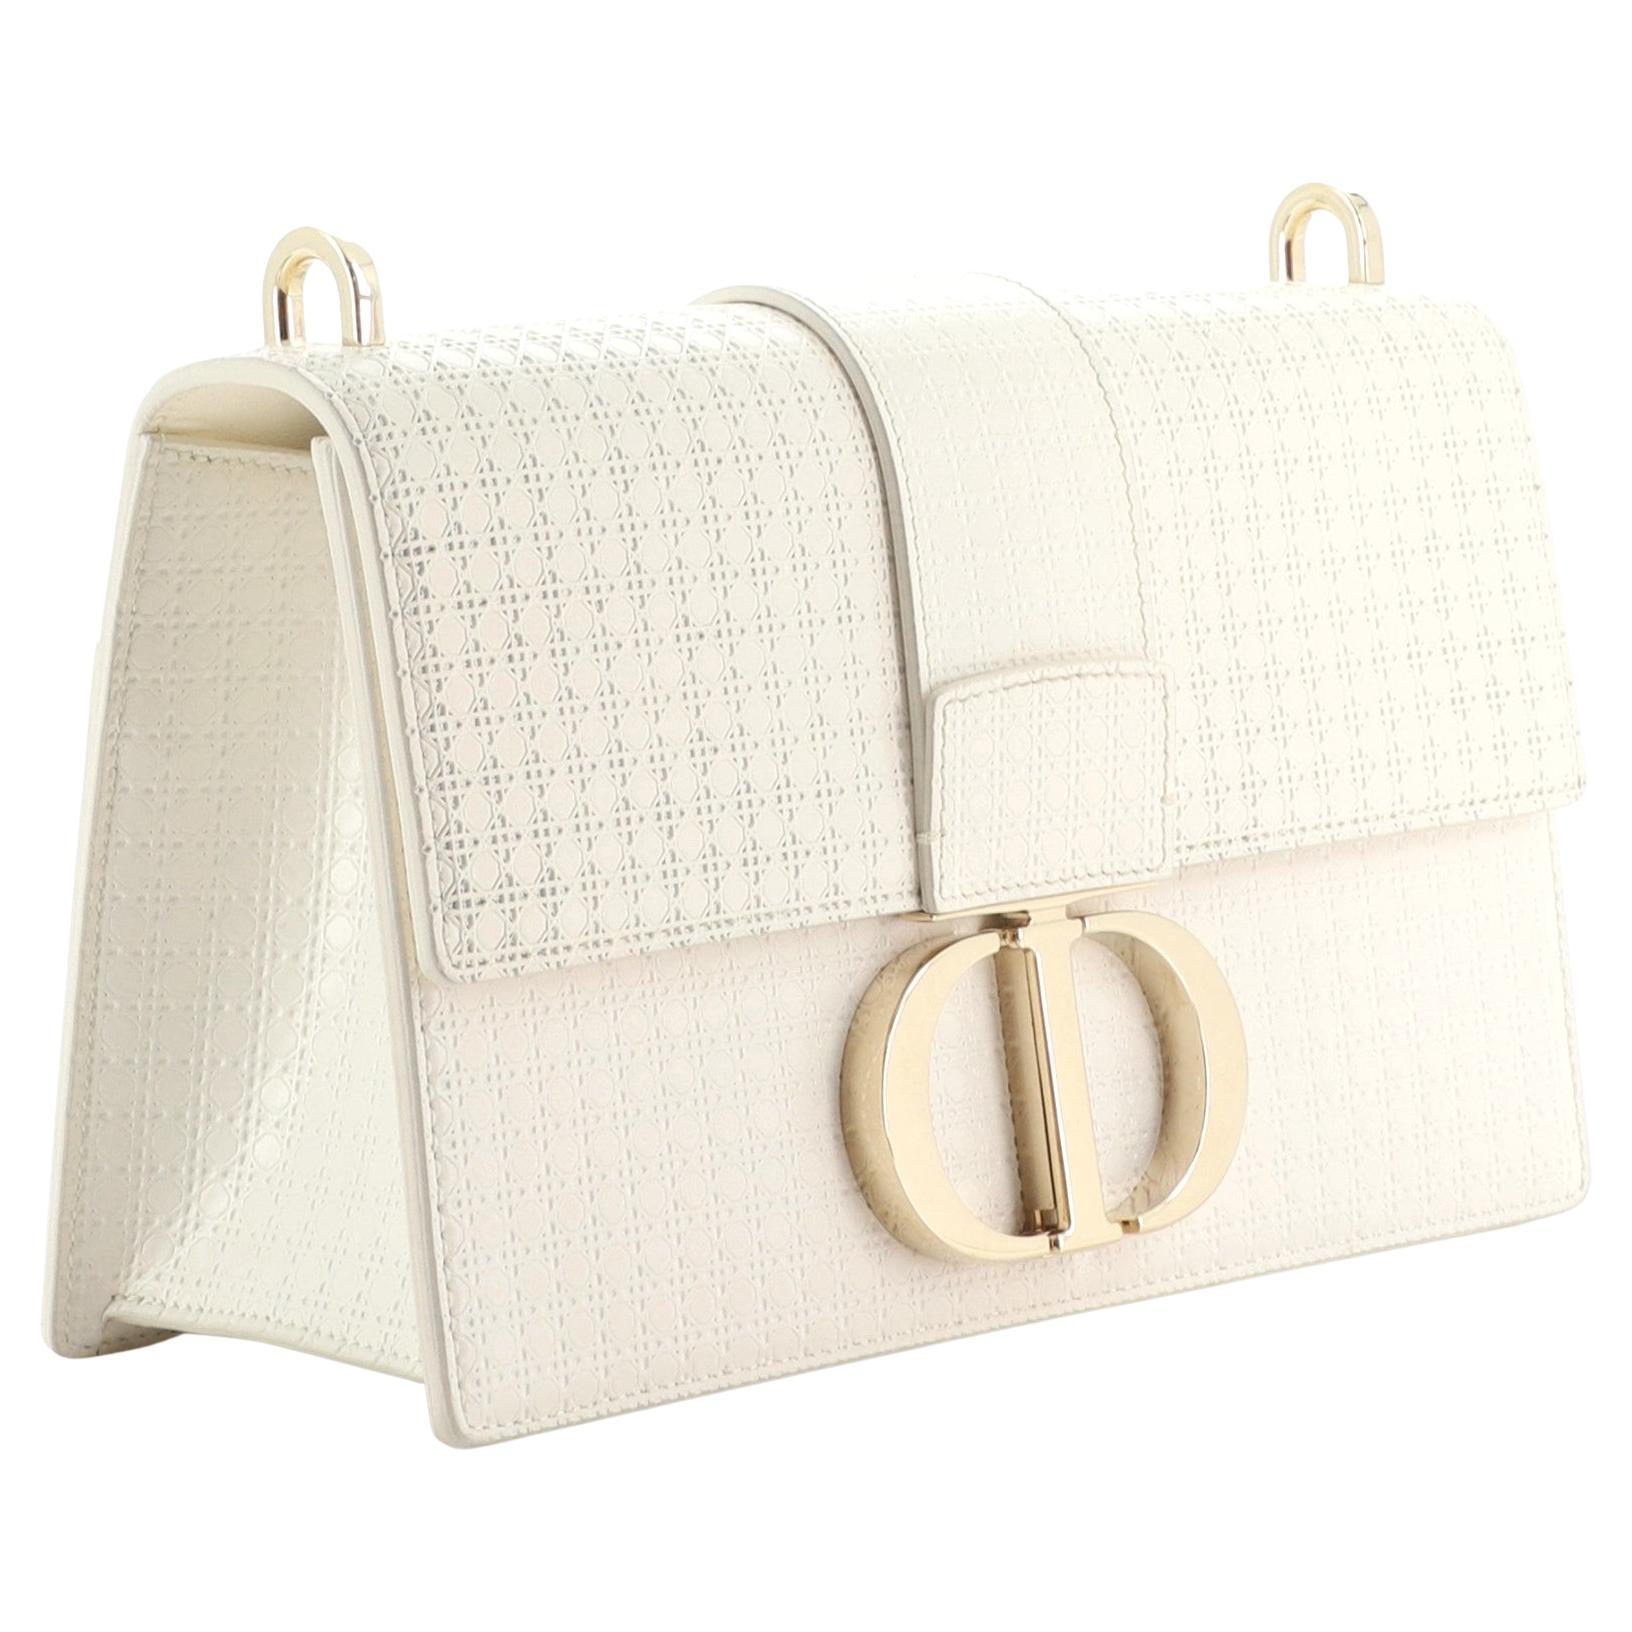 Christian Dior White Grained Calfskin Leather Montaigne 30 Flap